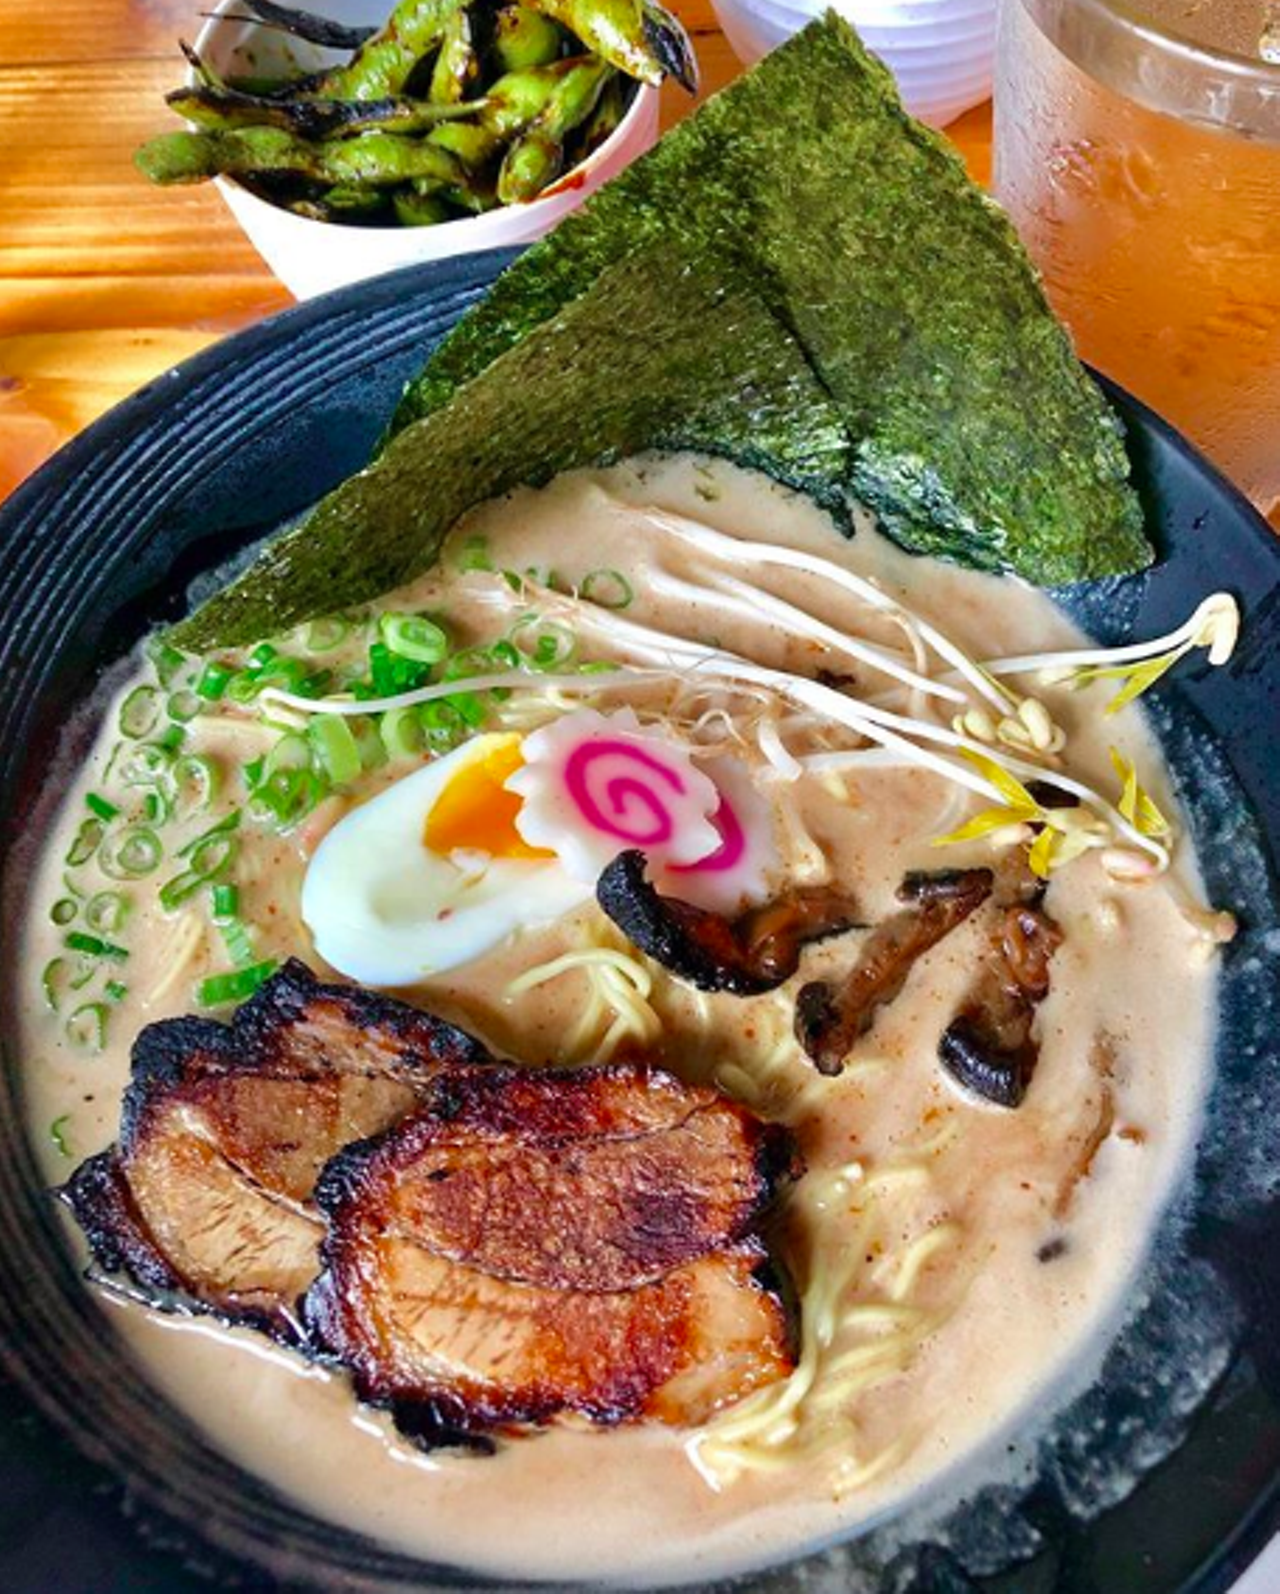 Kimura
152 E Pecan St #102, (210) 444-0702, kimurasa.com
Ramen has come a long way in San Antonio since Kimura opened in 2013. Chef Michael Sohocki’s downtown spot offers a customizable approach to ramen — inviting guests to choose their broth and protein in addition to a soft-boiled eggs, fresh bean sprouts, seaweed and pickled mushrooms. 
Photo via Instagram / 2hungrygals